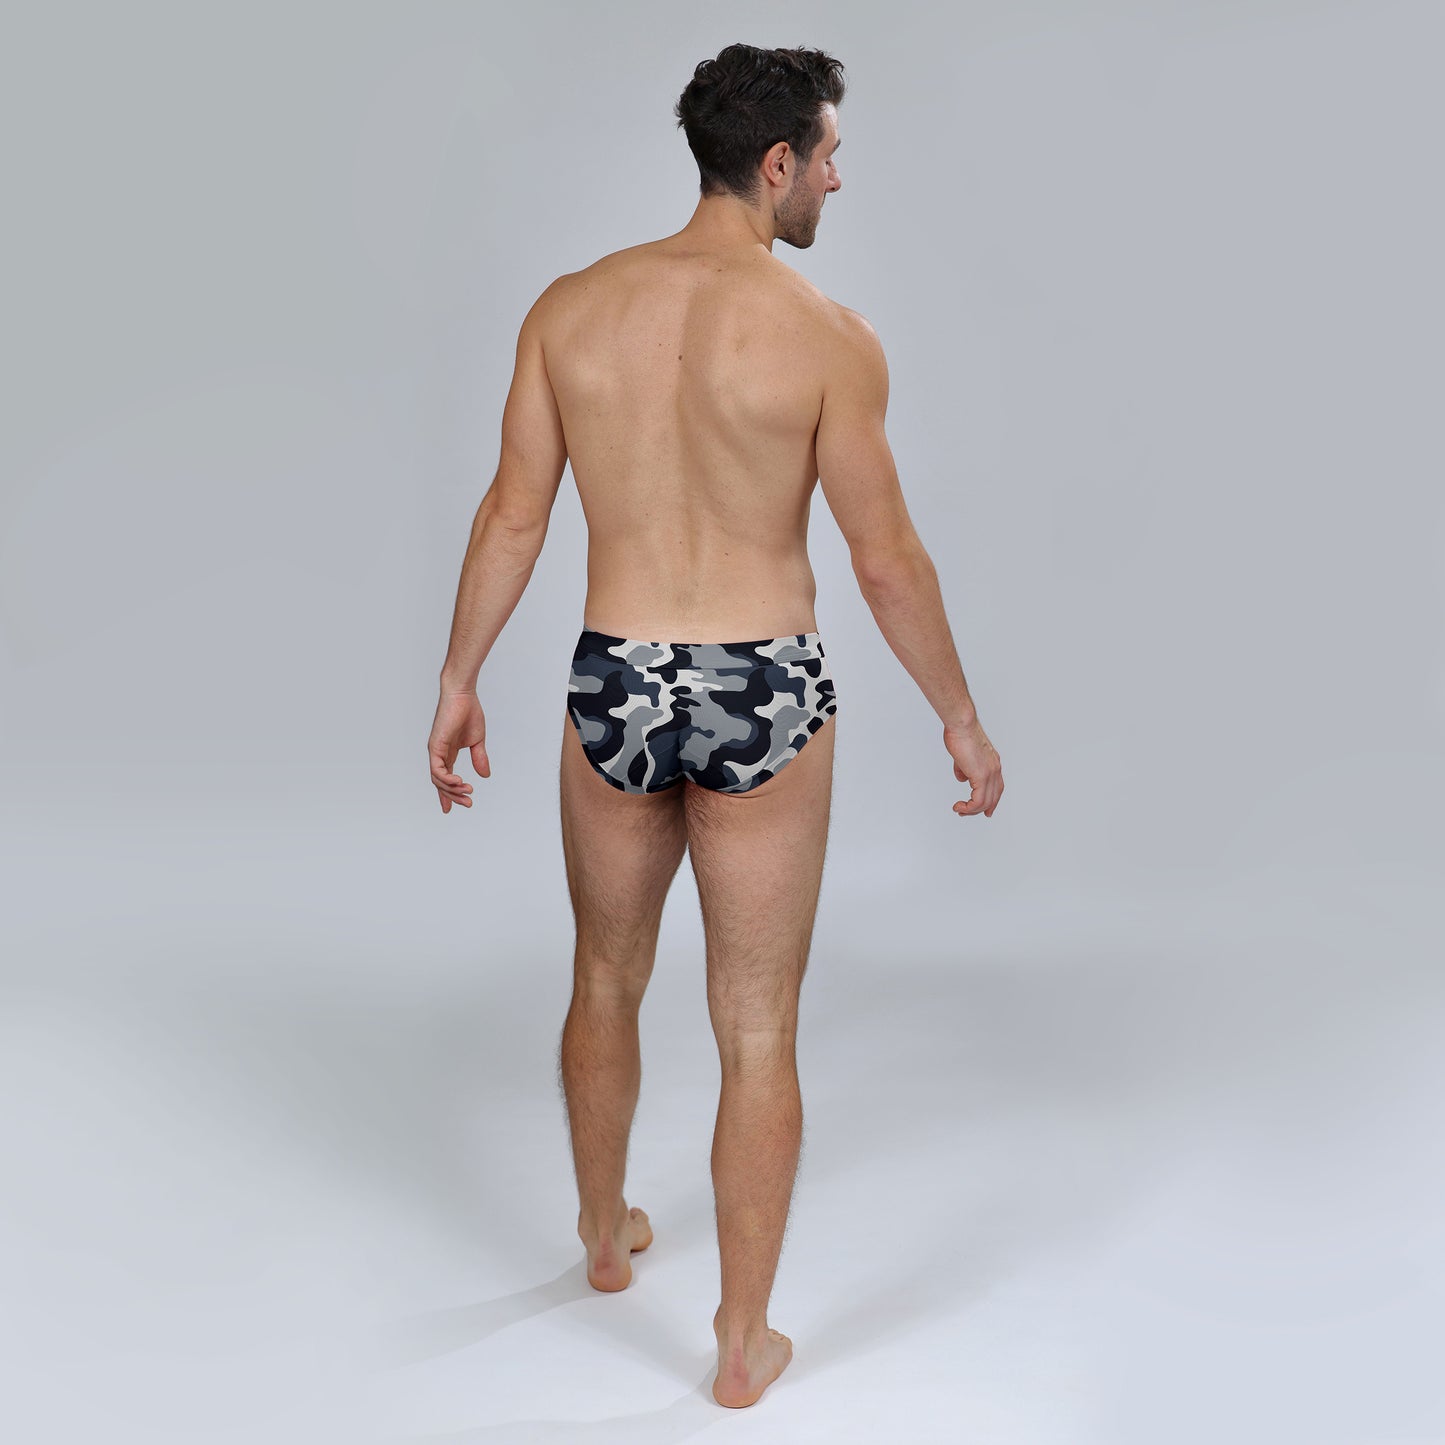 The Limited Edition Blue Camo Brief for men in the USA and Canada